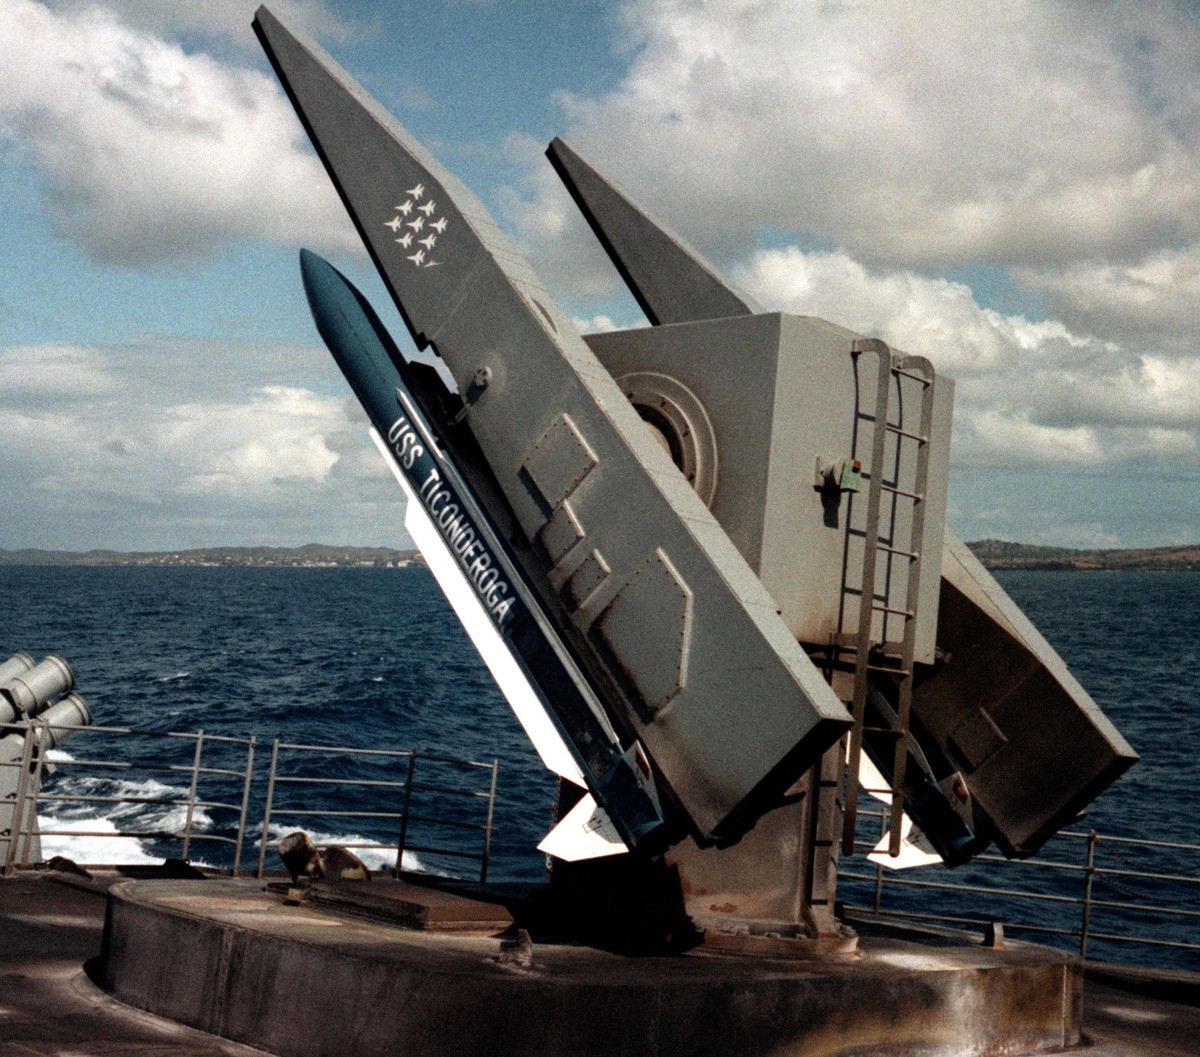 mk-26 guided missile launching system gmls ticonderoga class cruiser